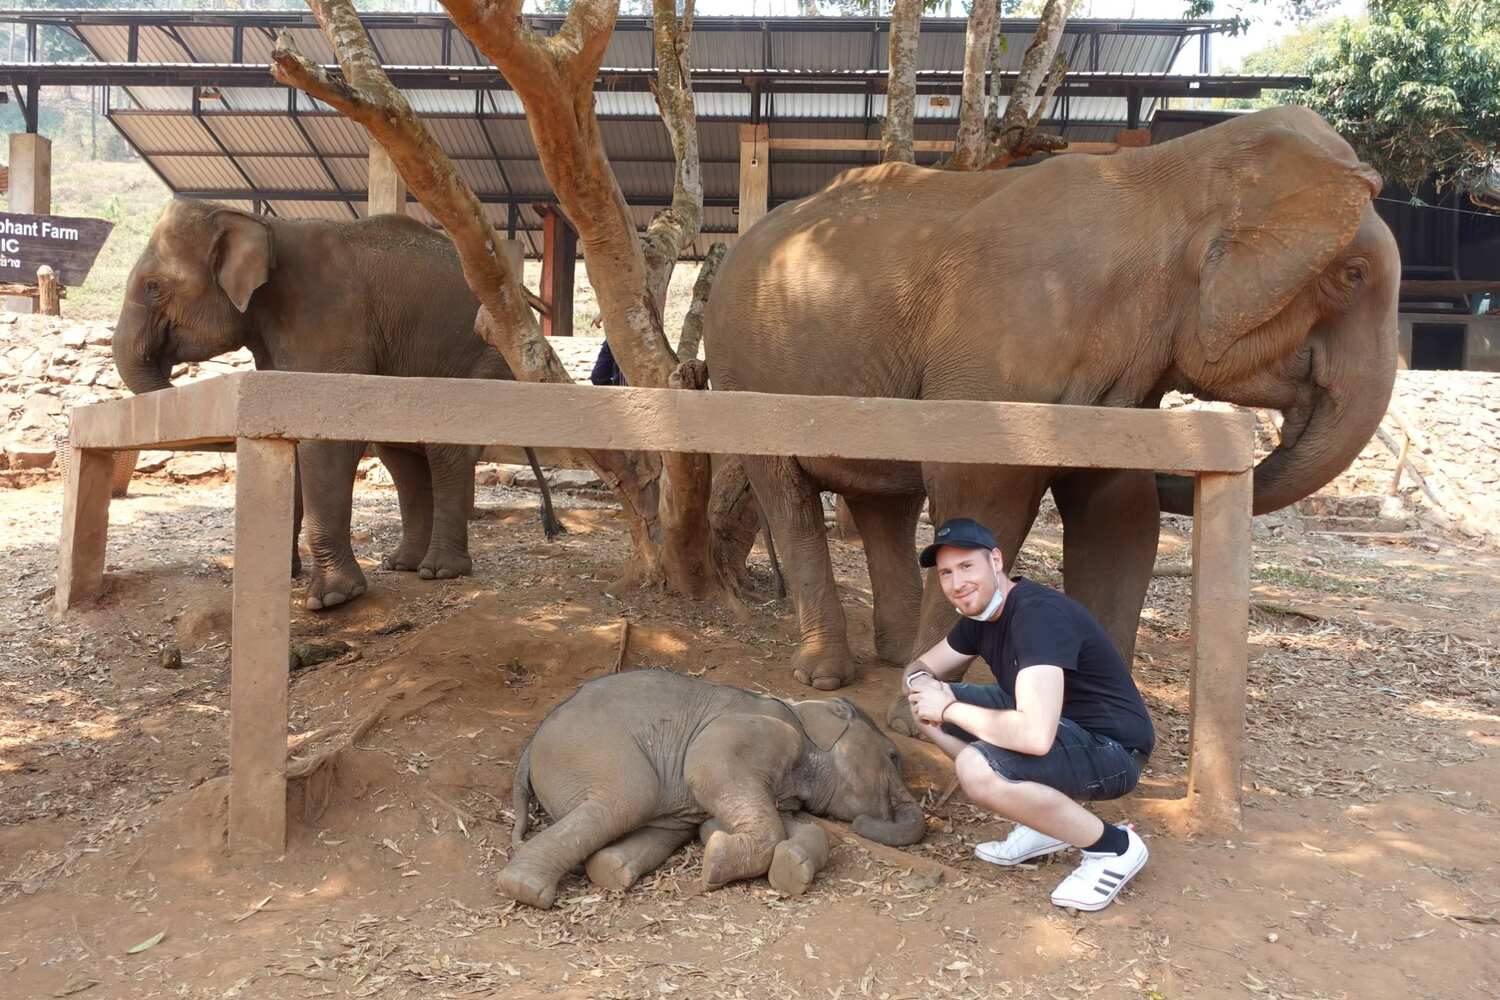 Man posing with a baby elephant in Chiang Mai